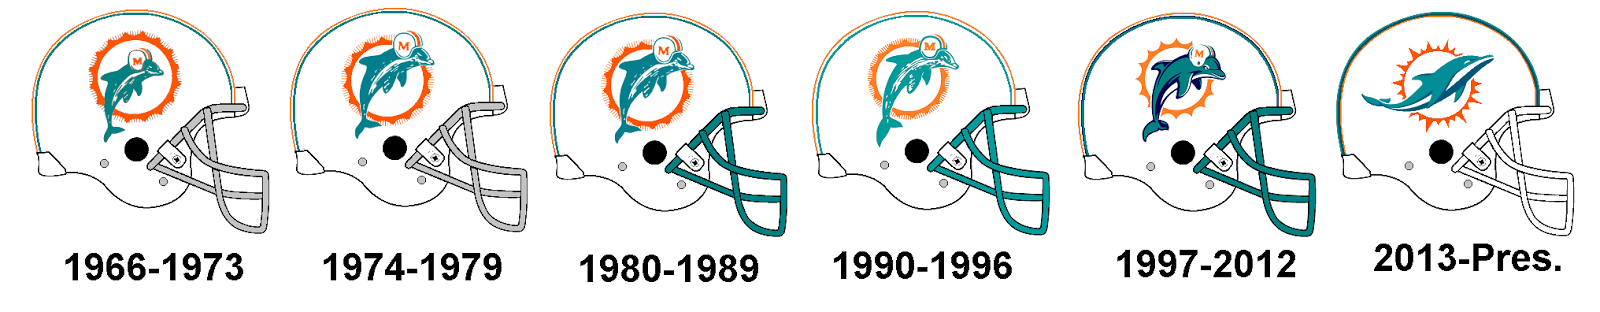 New Dolphins Logo - Should The Dolphins Go with The Classic Logo or the New Logo? - The ...